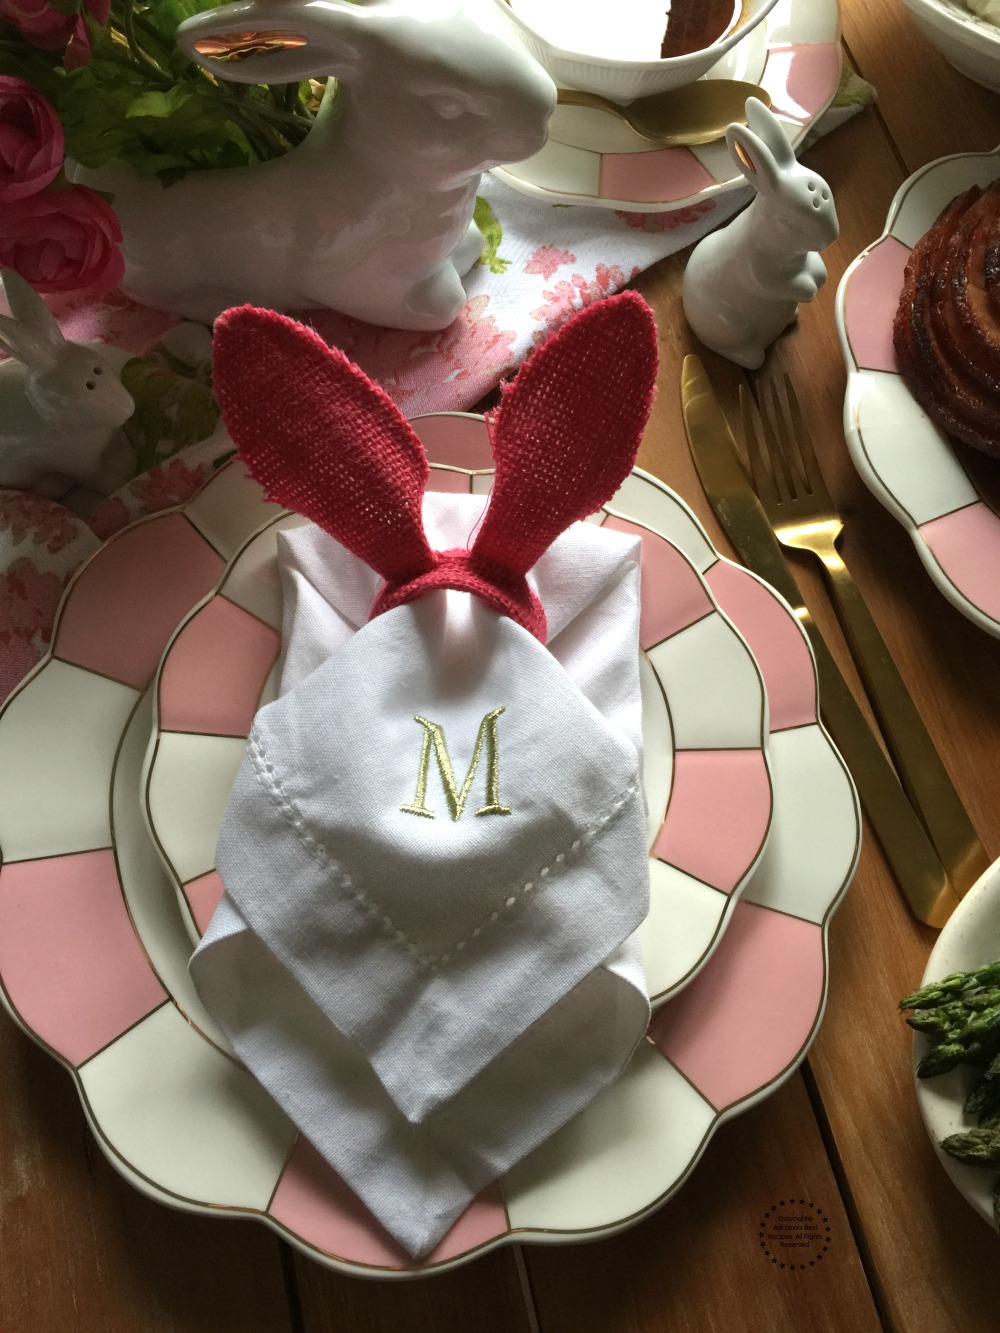 Easter brunch setup includes bunny ears and pink china